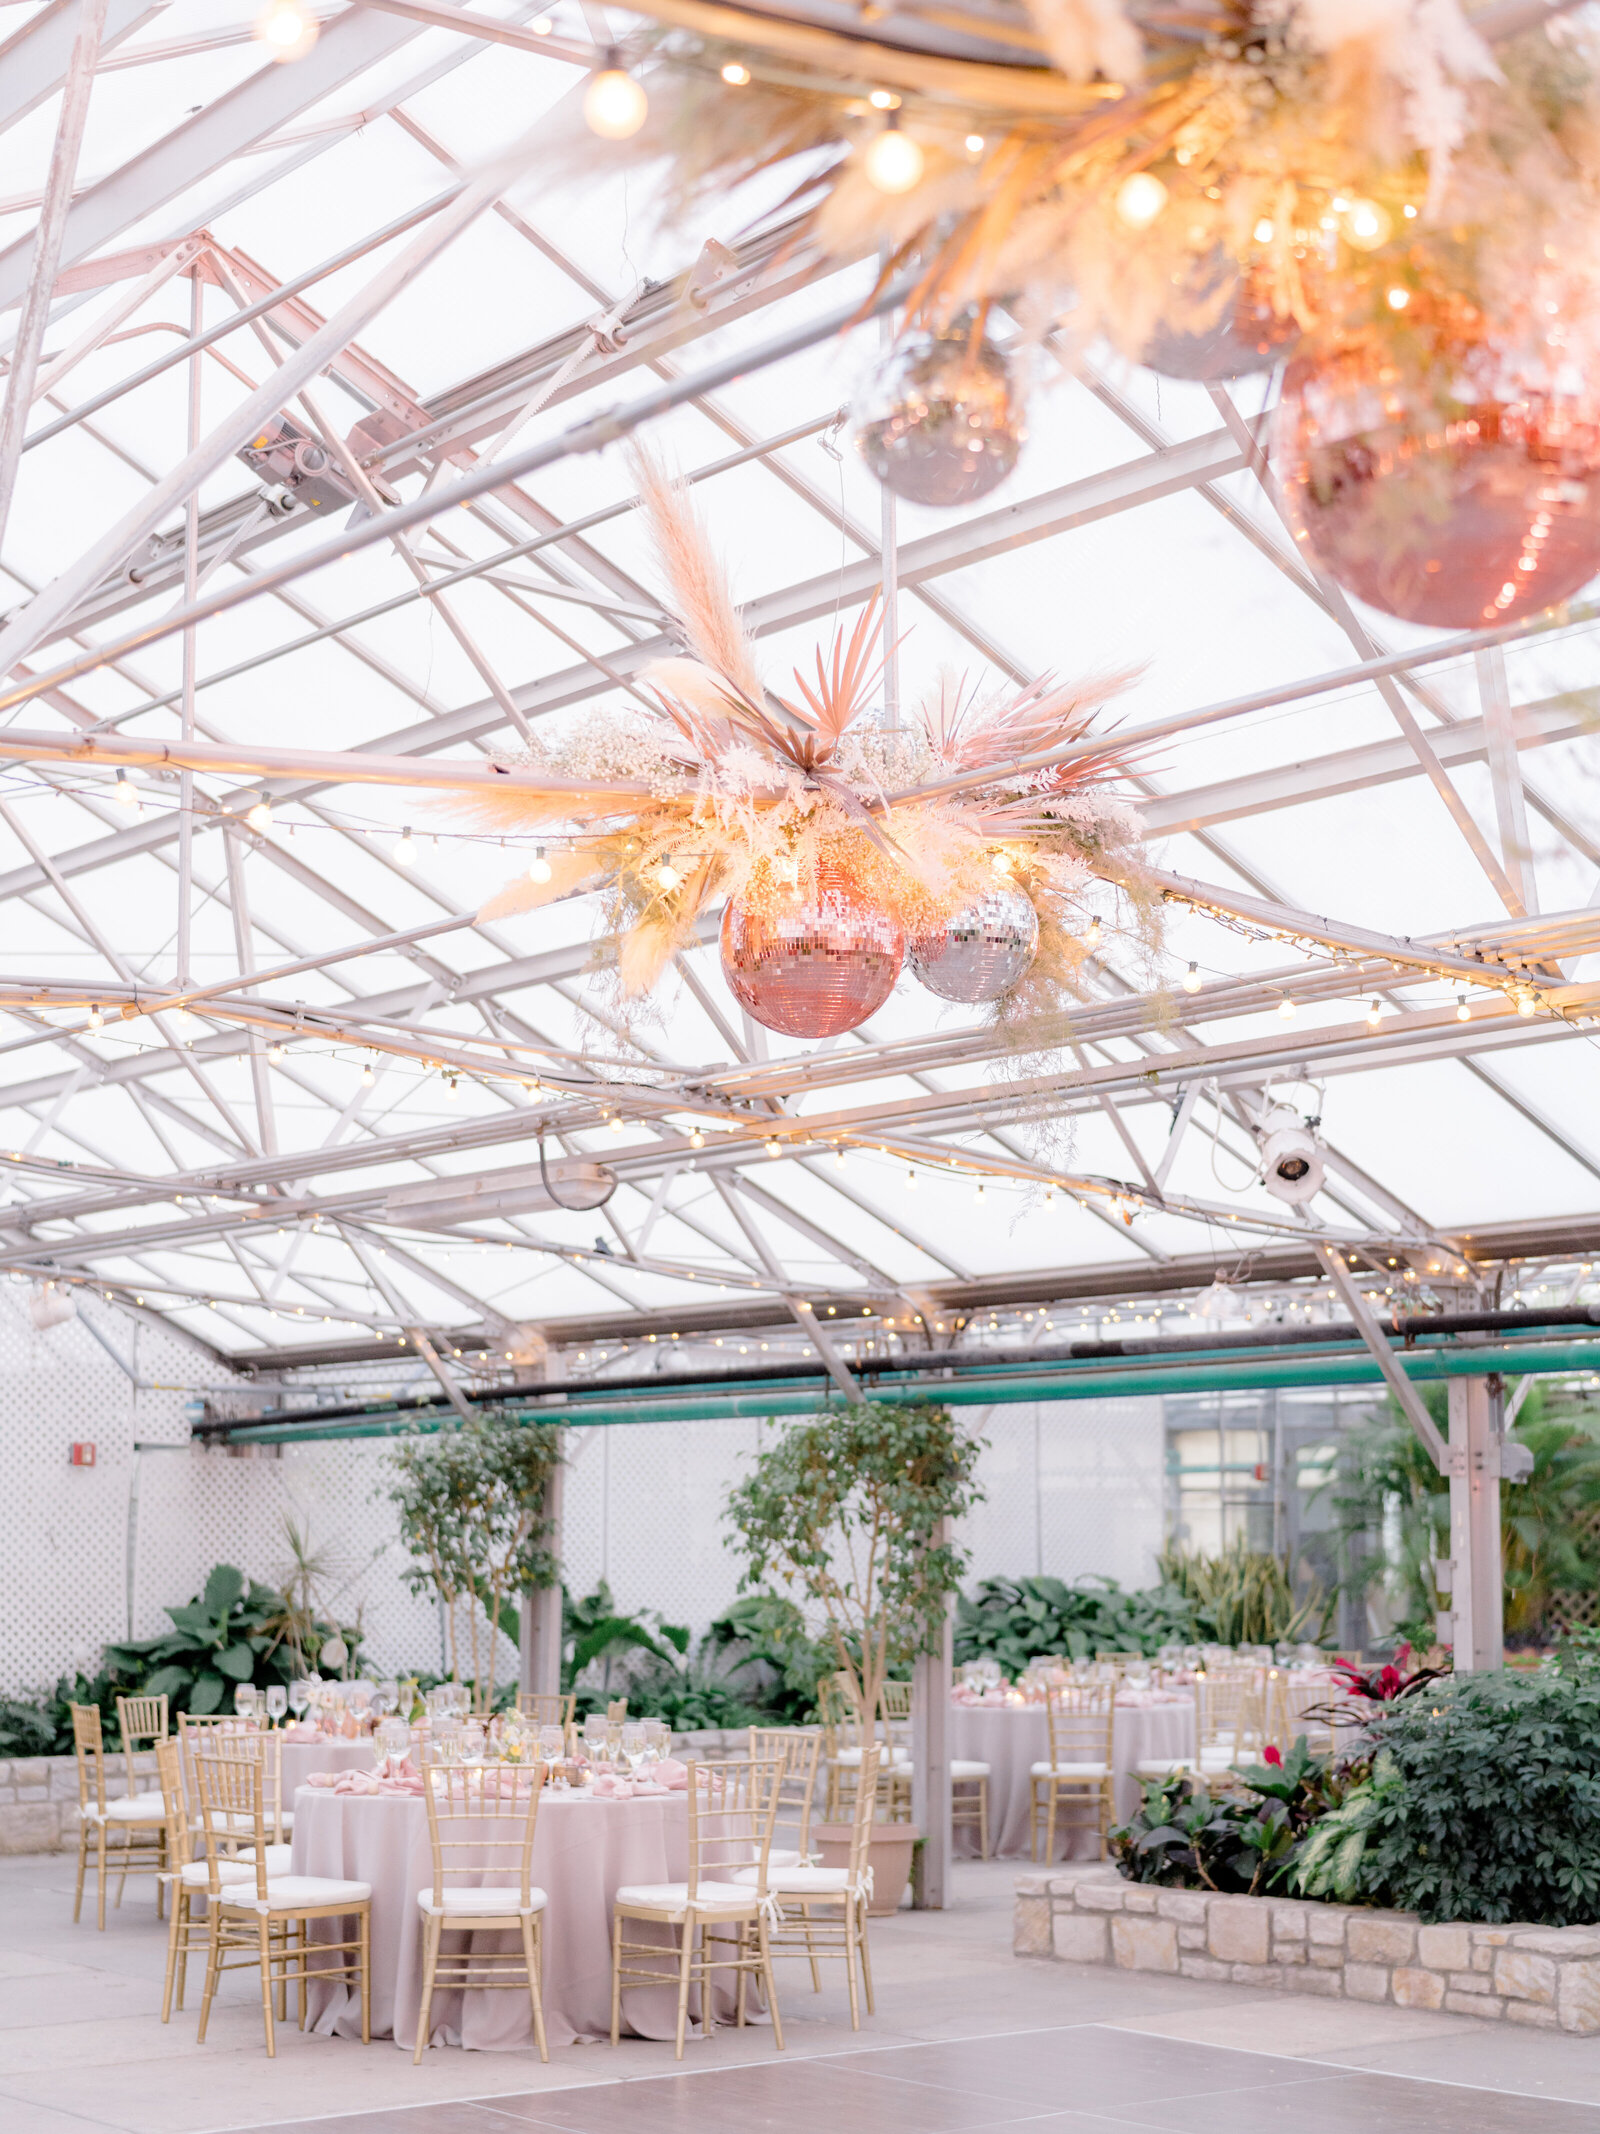 Melissa and Keith - Fairmount Park Horticulture Center - Magi Fisher - 749